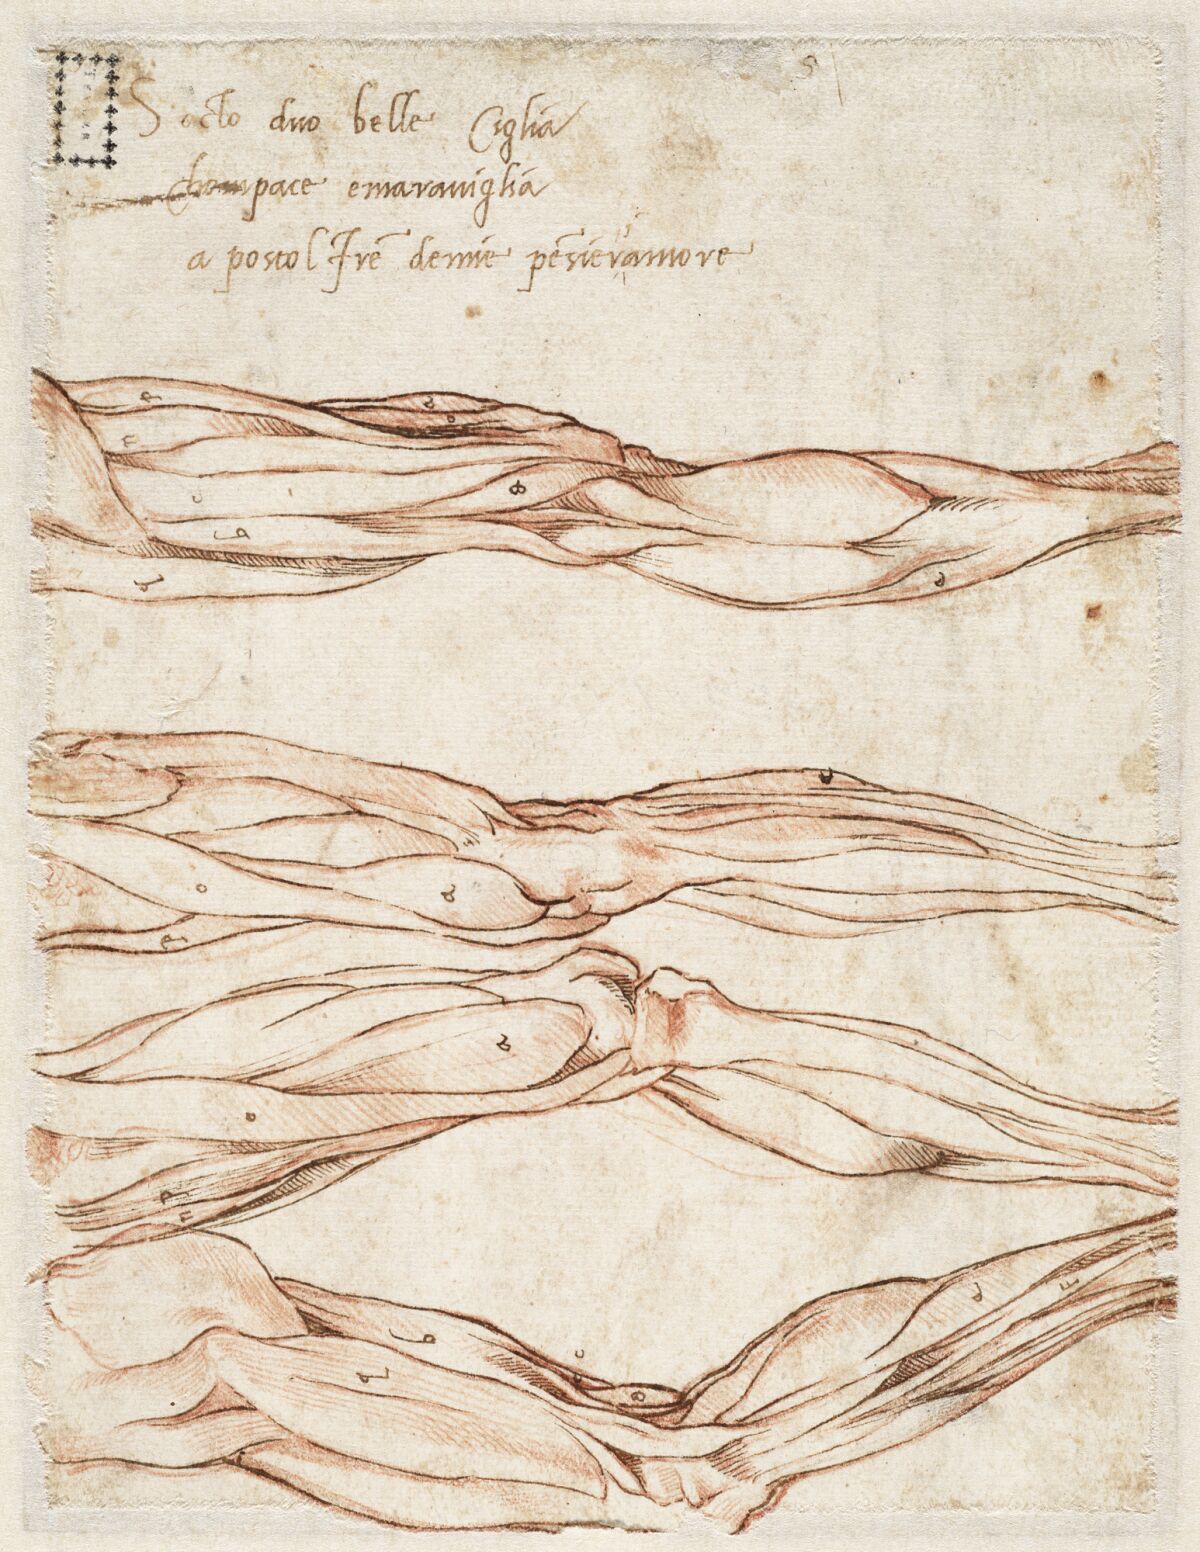 Michelangelo, "Four Studies of a Left Leg," circa 1515-20, red chalk, pen and brown ink